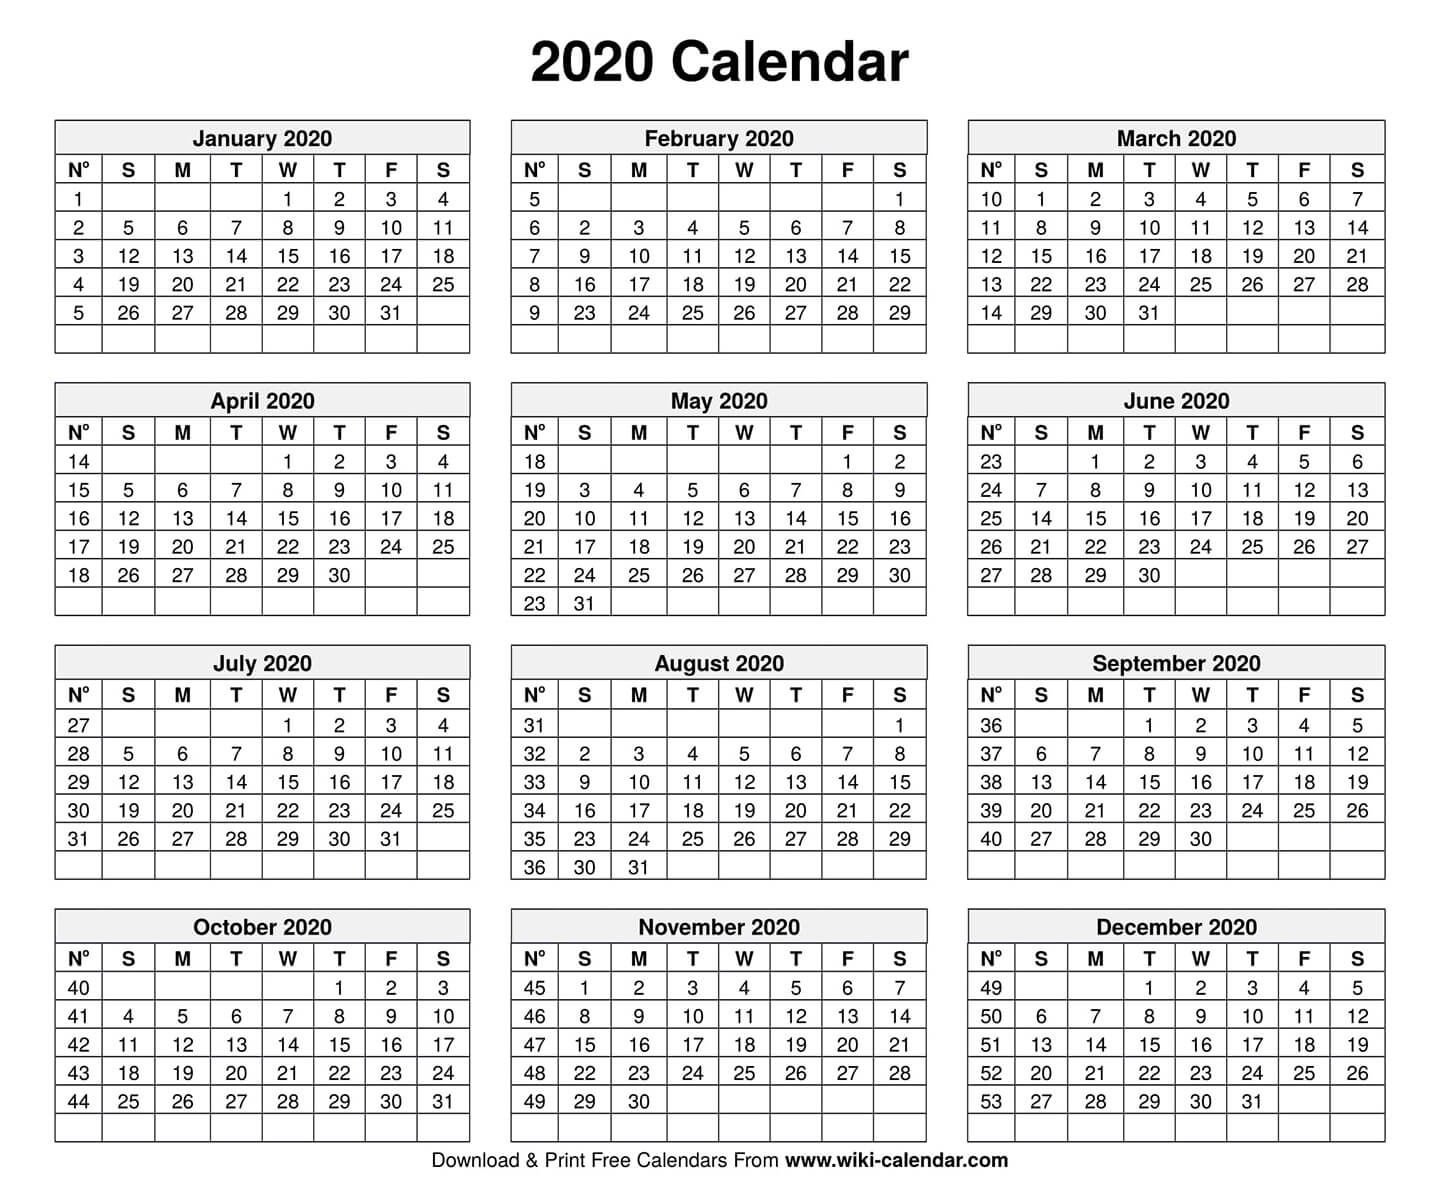 2020 Calendar Printable With Numbered Days | Monthly Remarkable Calendar With Days Numbered 2020